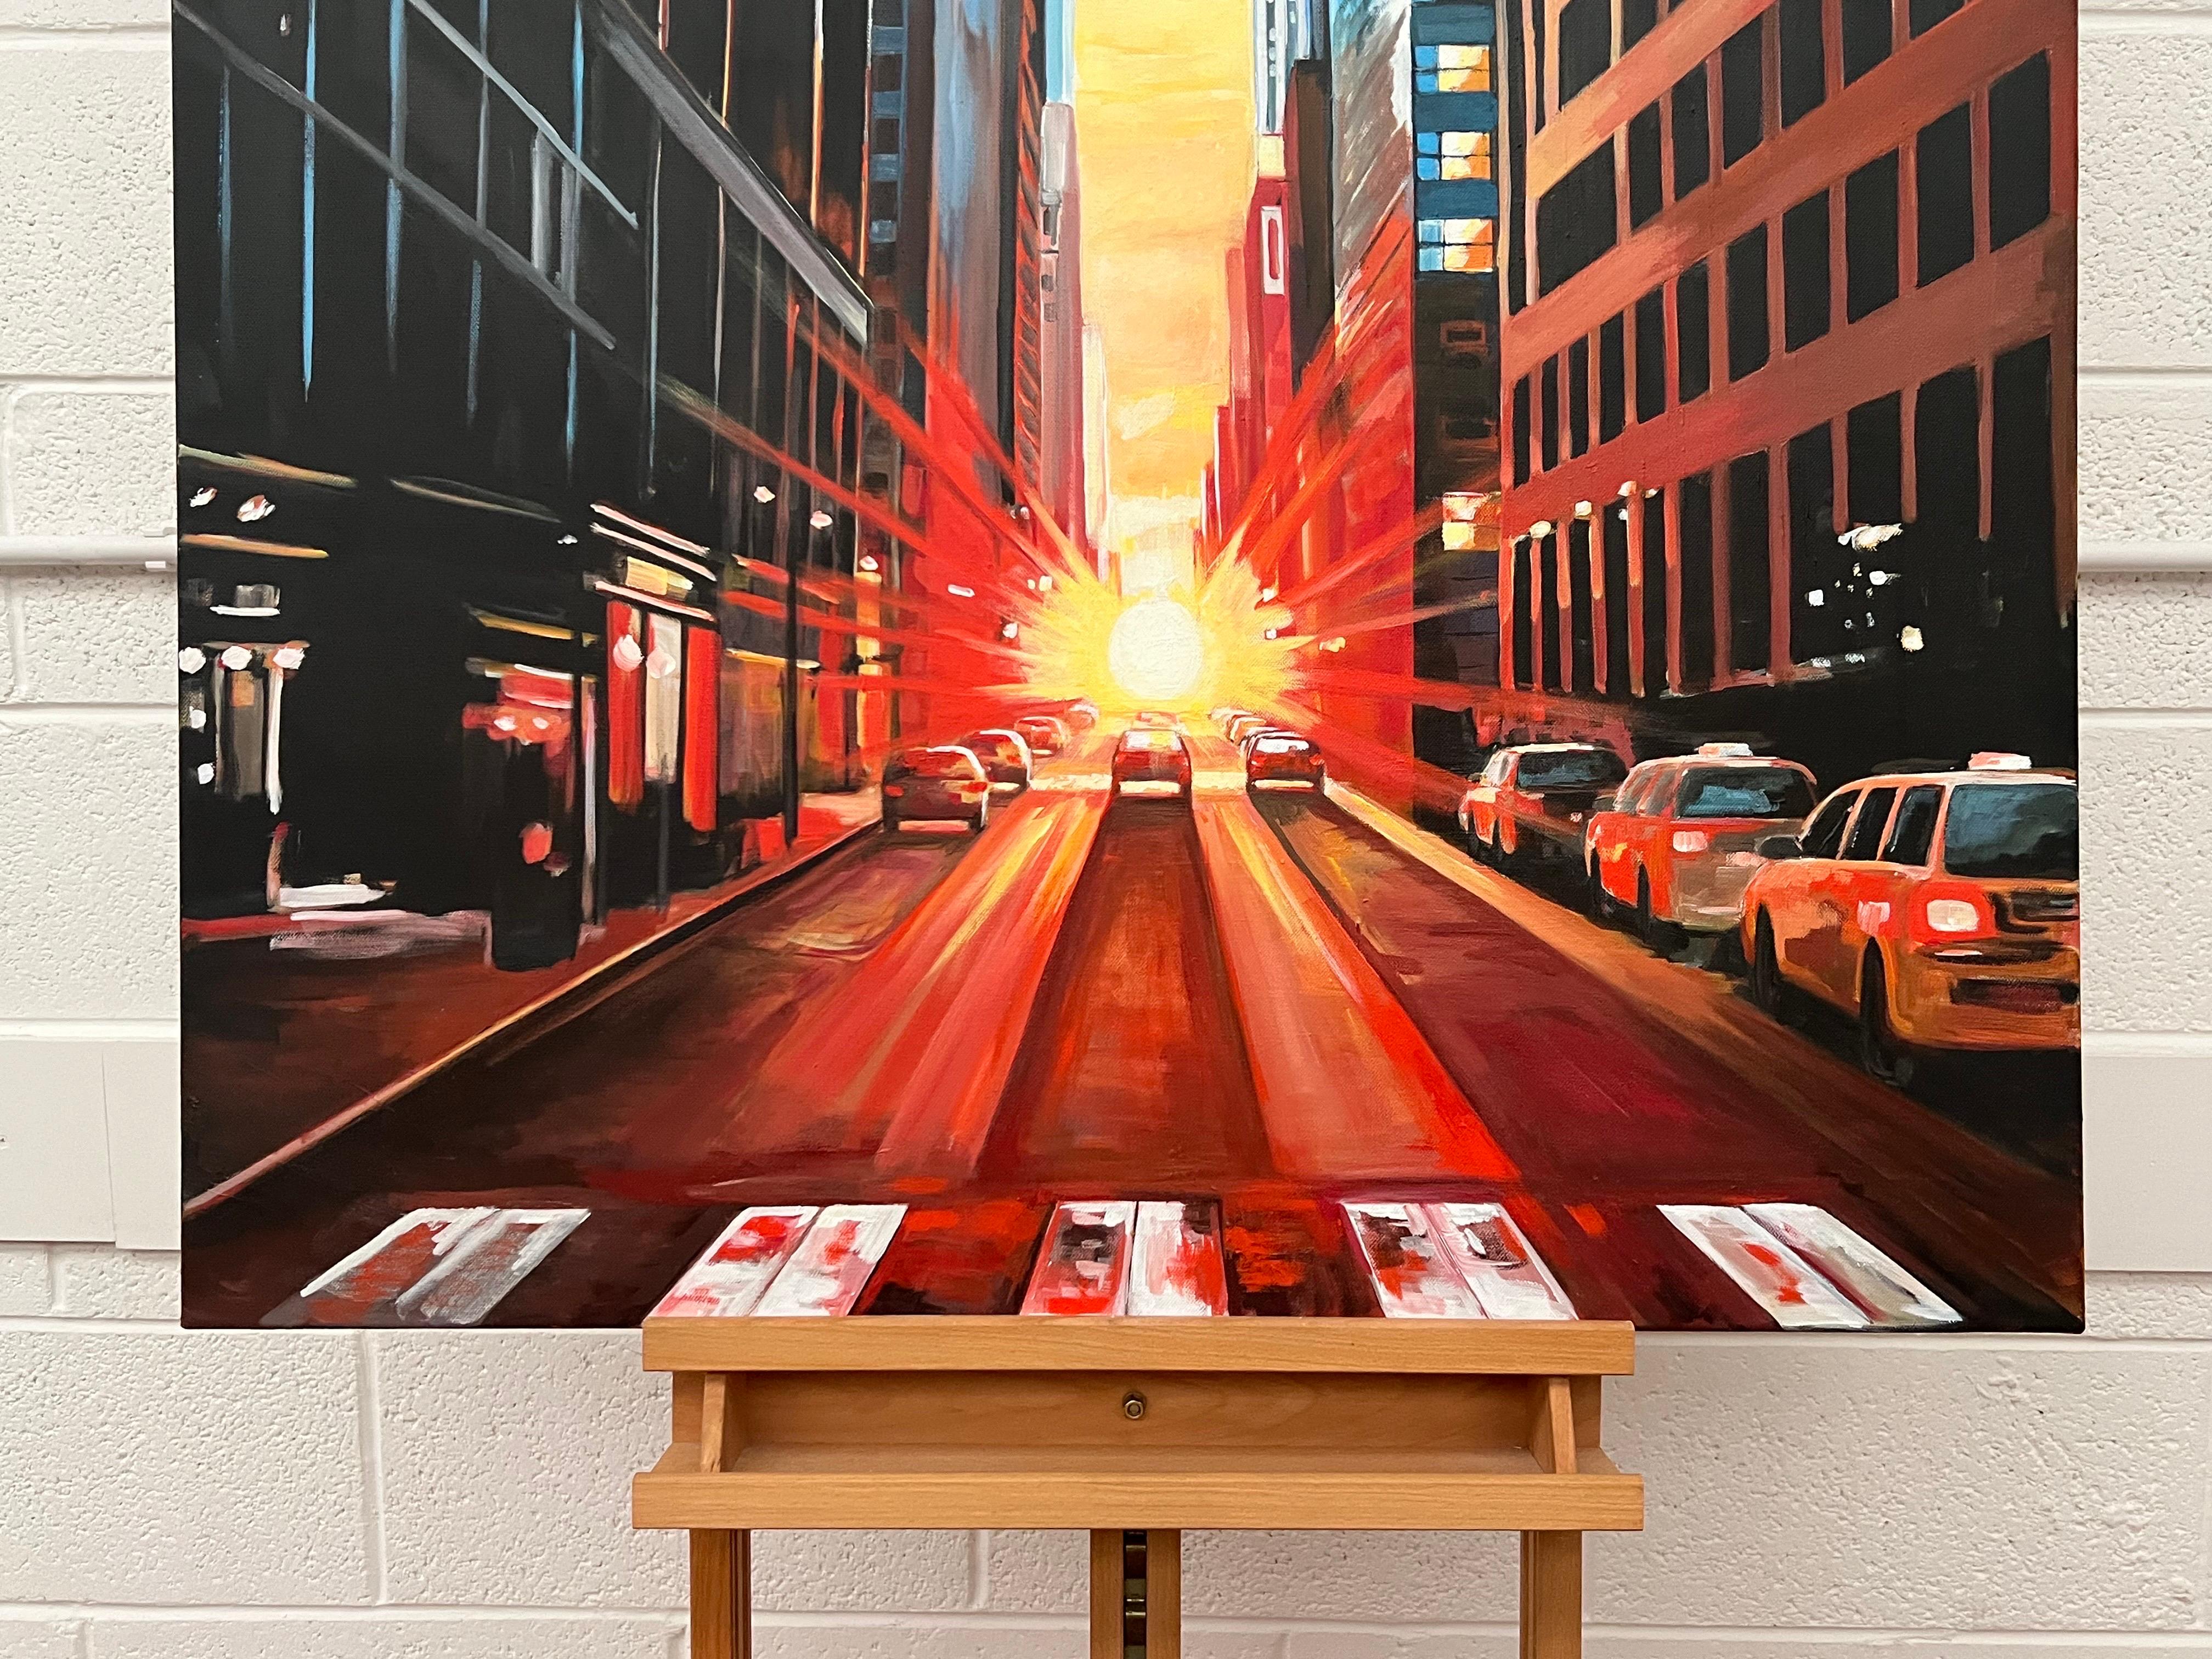 Manhattan Henge New York City Dramatic Sunset by British Urban Landscape Artist, Angela Wakefield. Painted using strong blue, red and yellow primary colours, this striking original forms part of her New York Series. 

Art measures 36 x 48